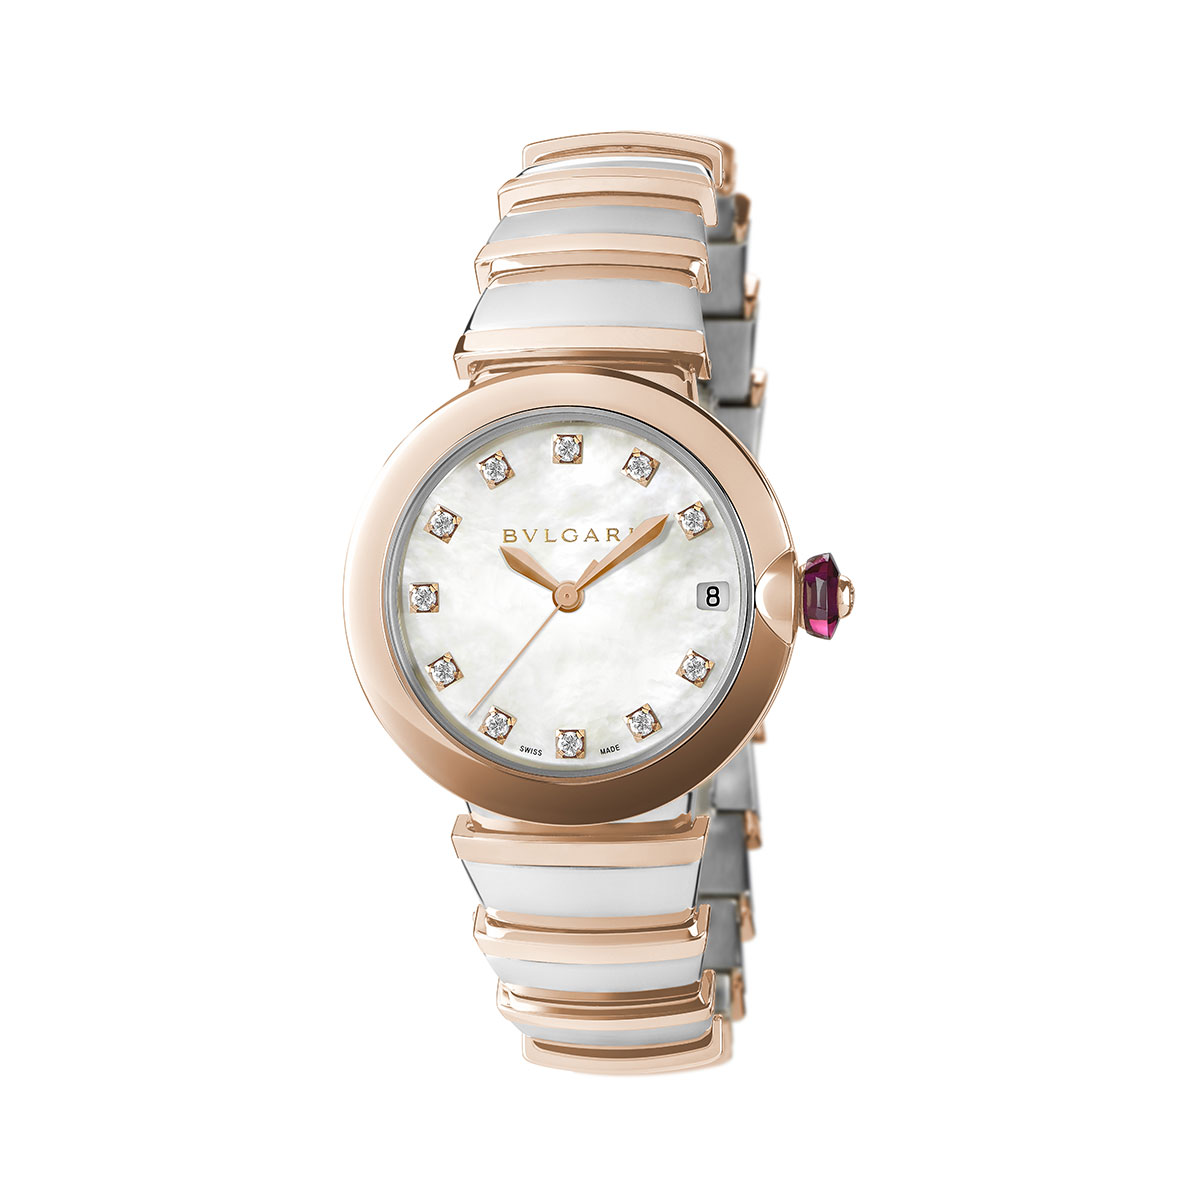 Bulgari Lucea Scaglie Steel and Rose Gold 33mm Watch 102198